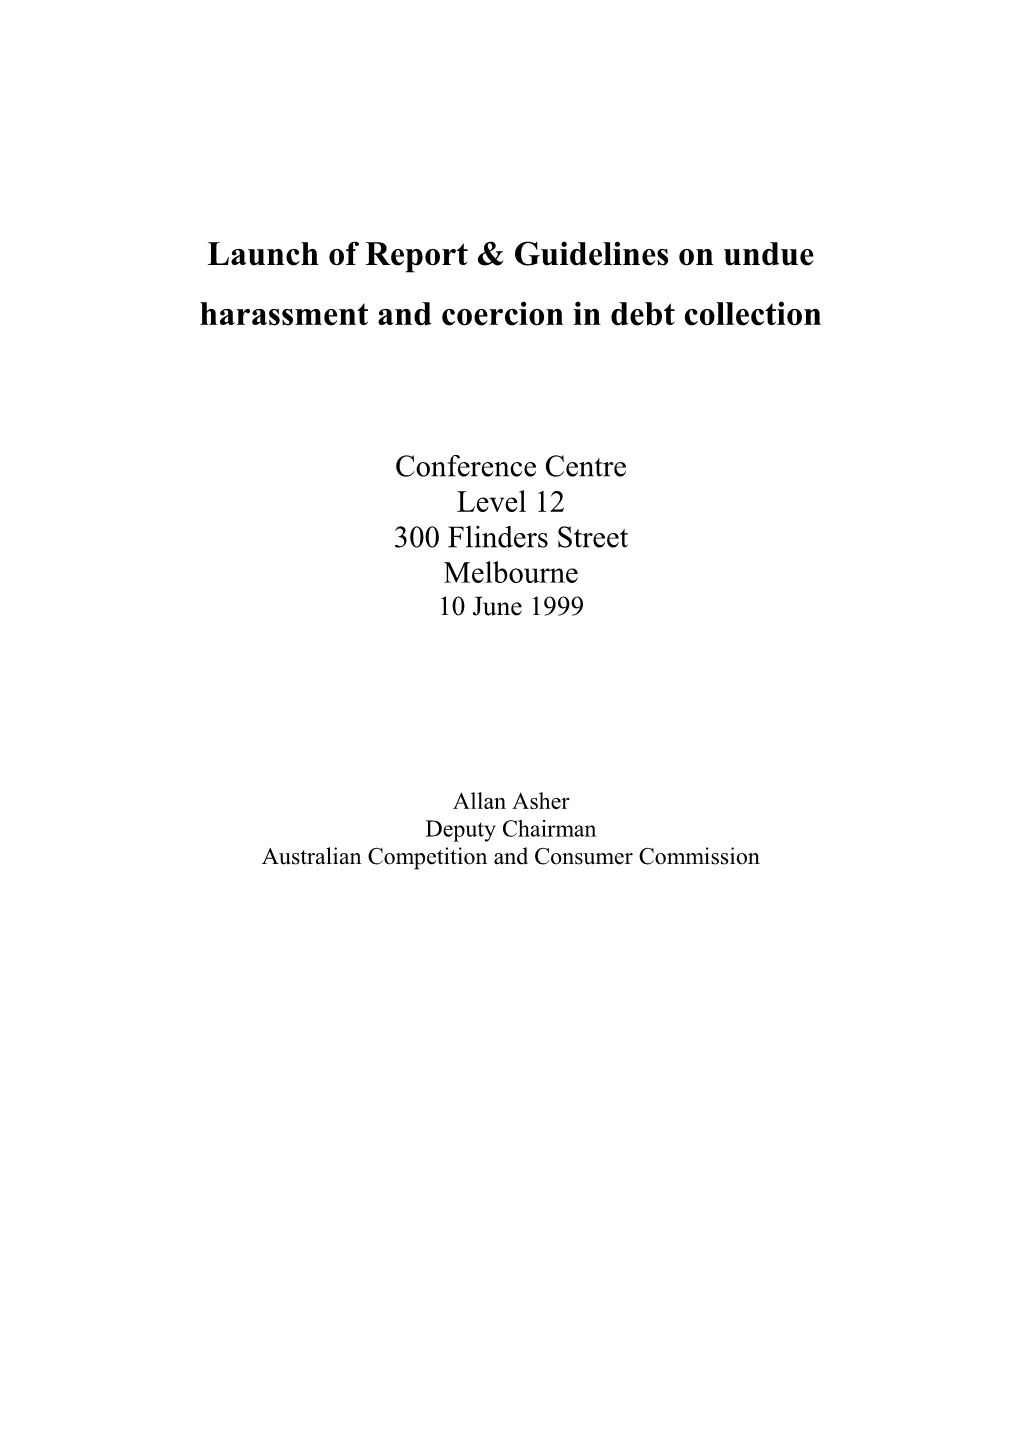 Launch of Report & Guidelines on Undue